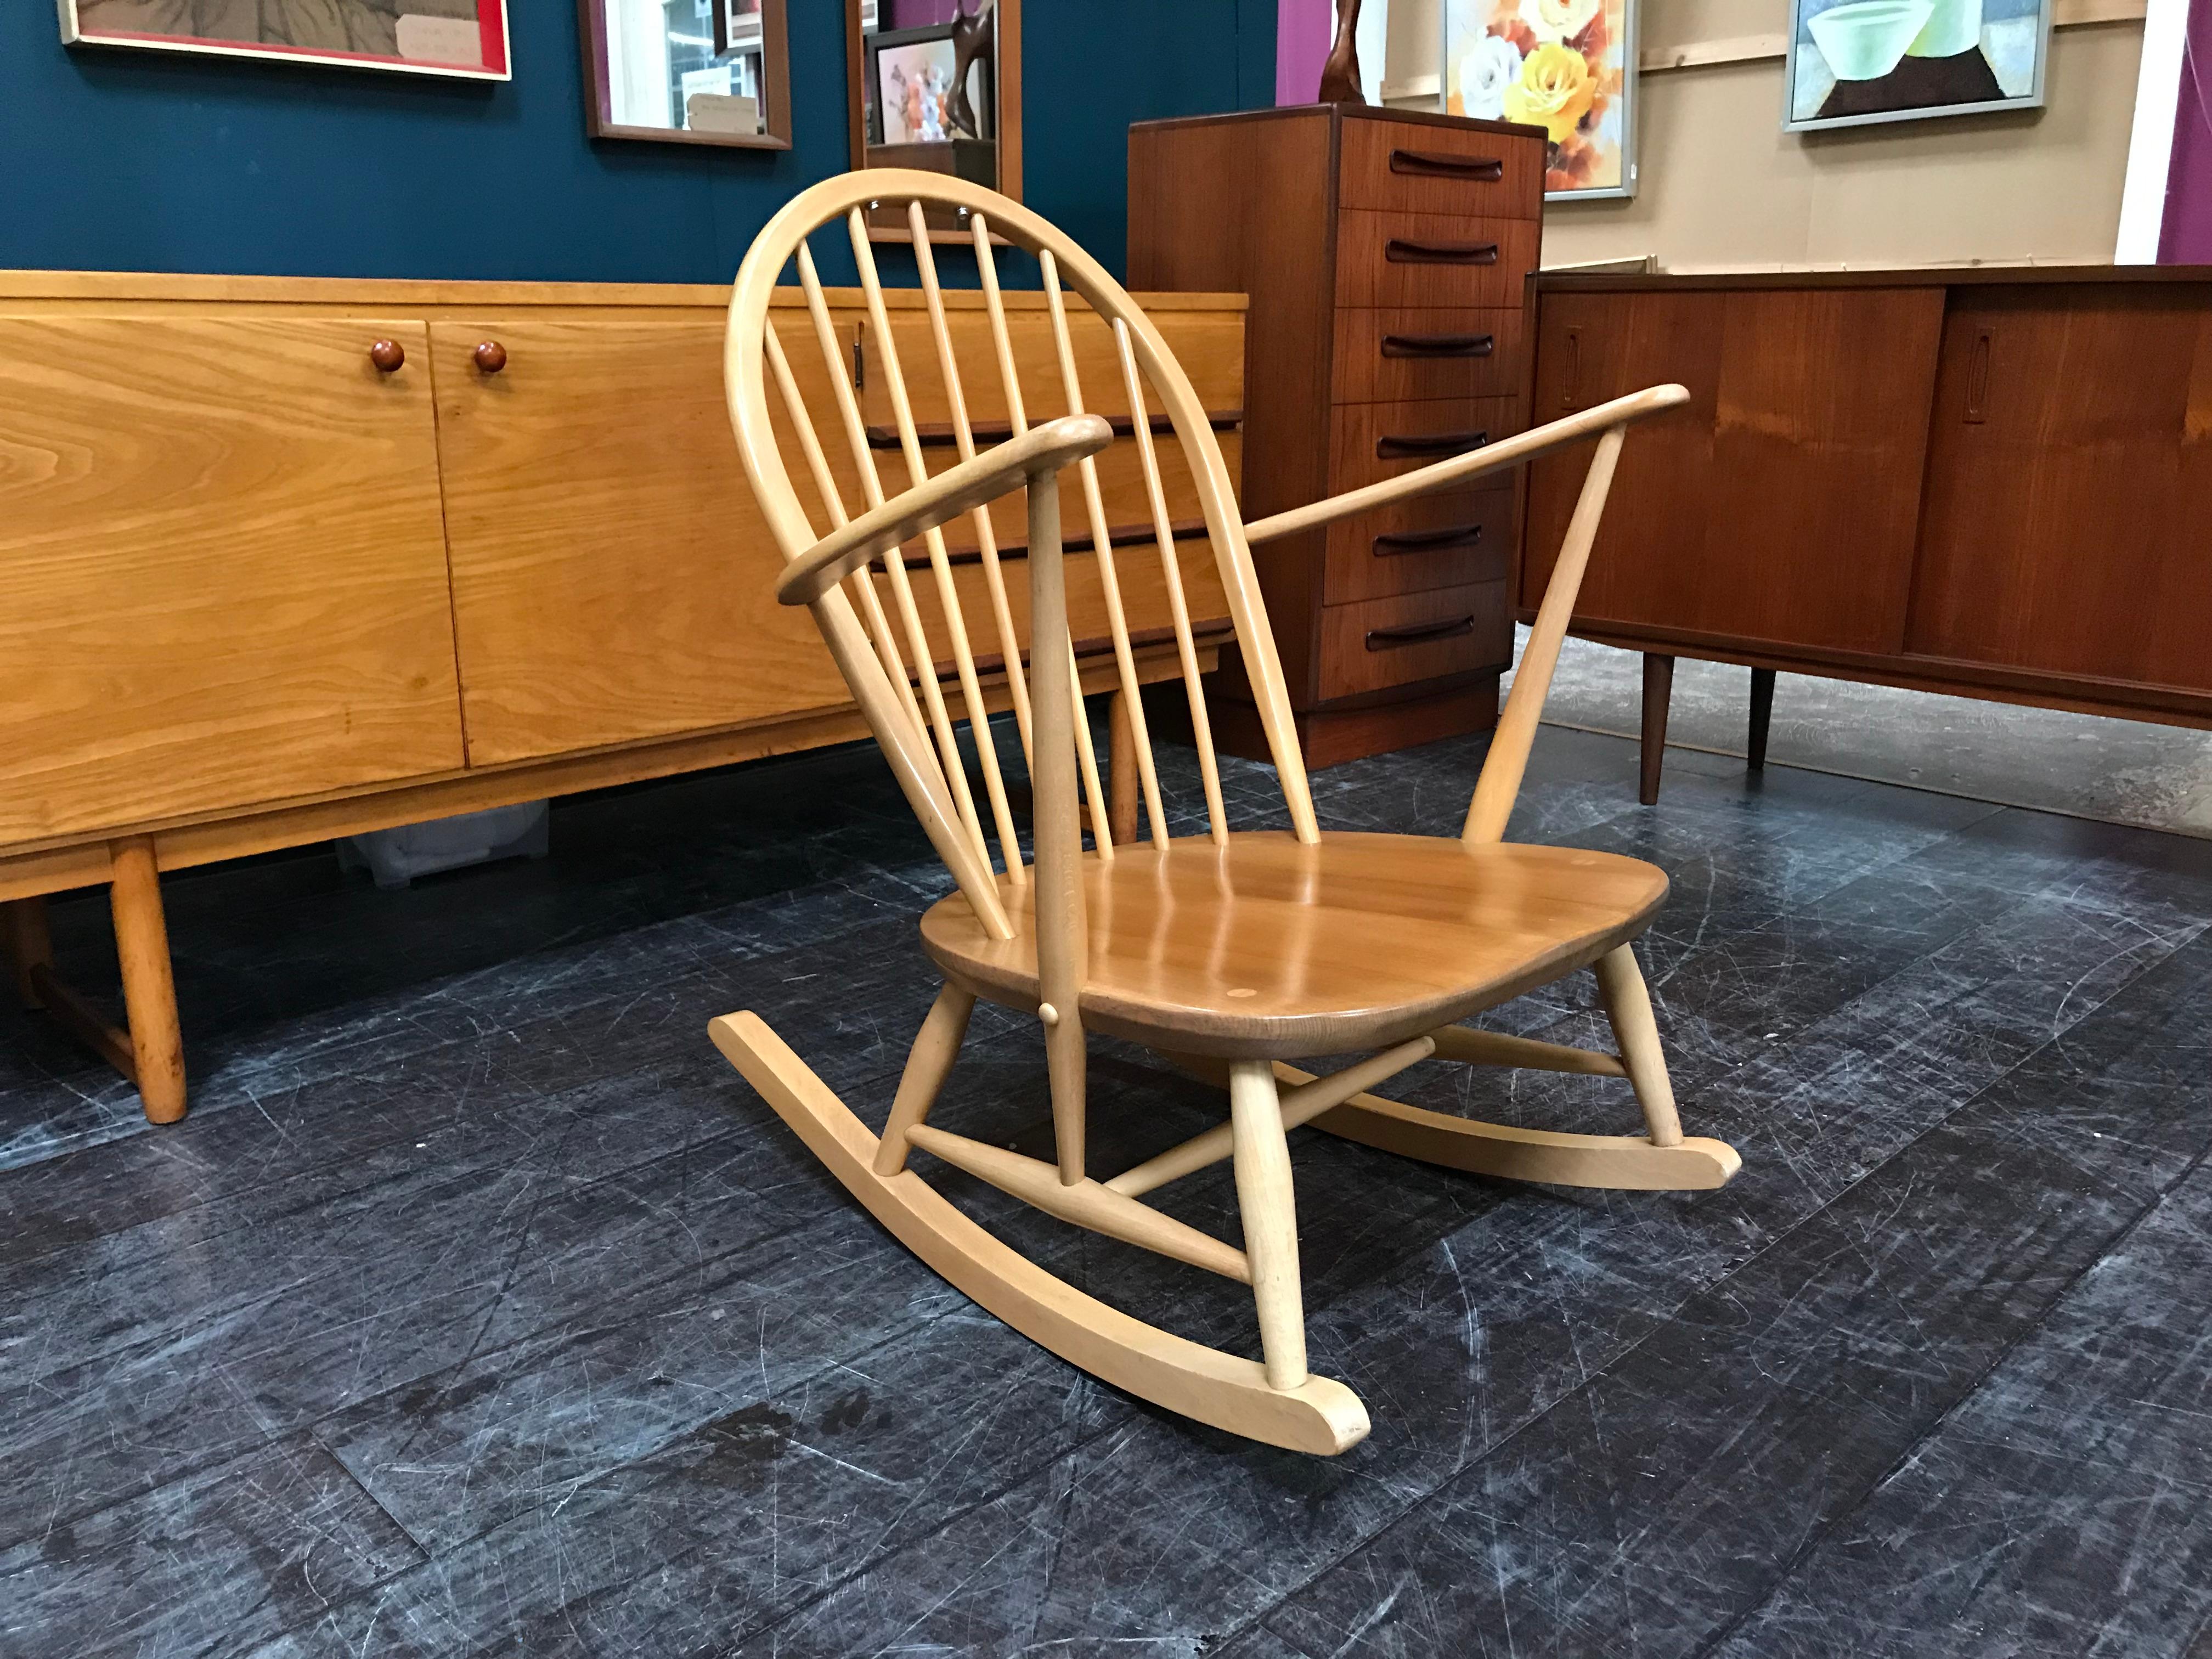 This is a vintage Ercol Windsor rocking chair in sought-after light wood. Perfect for any living space, this elegant rocking chair shows how effortlessly Ercol combines the vintage look with the up-to-the-minute style of metro living. Extremely